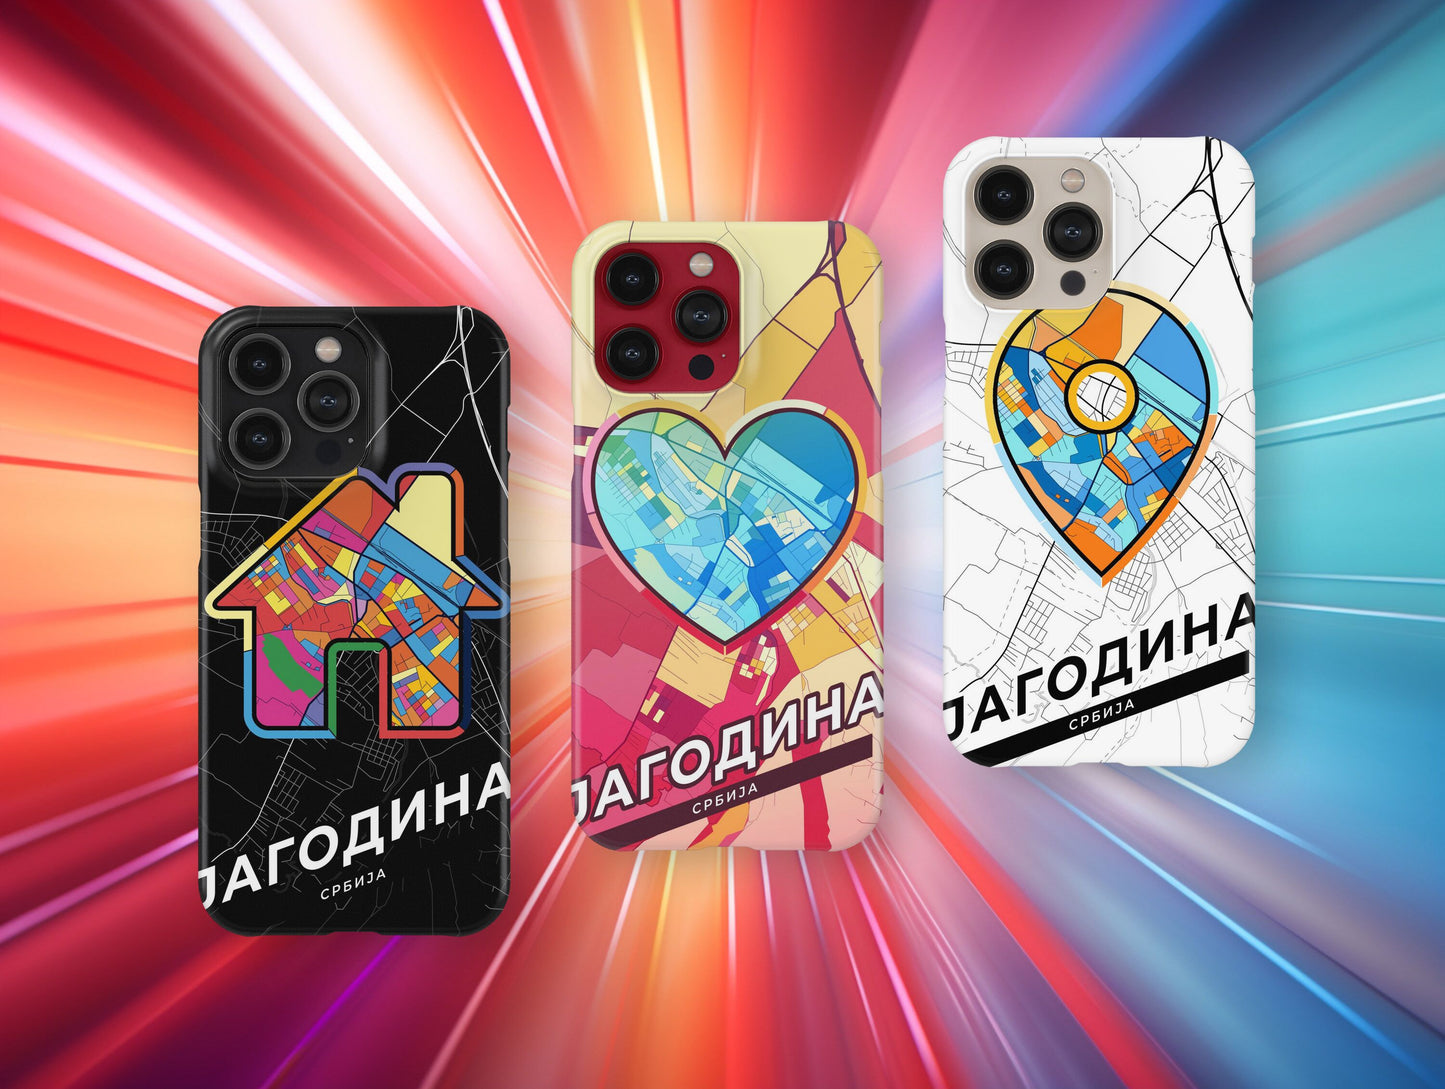 Jagodina Serbia slim phone case with colorful icon. Birthday, wedding or housewarming gift. Couple match cases.